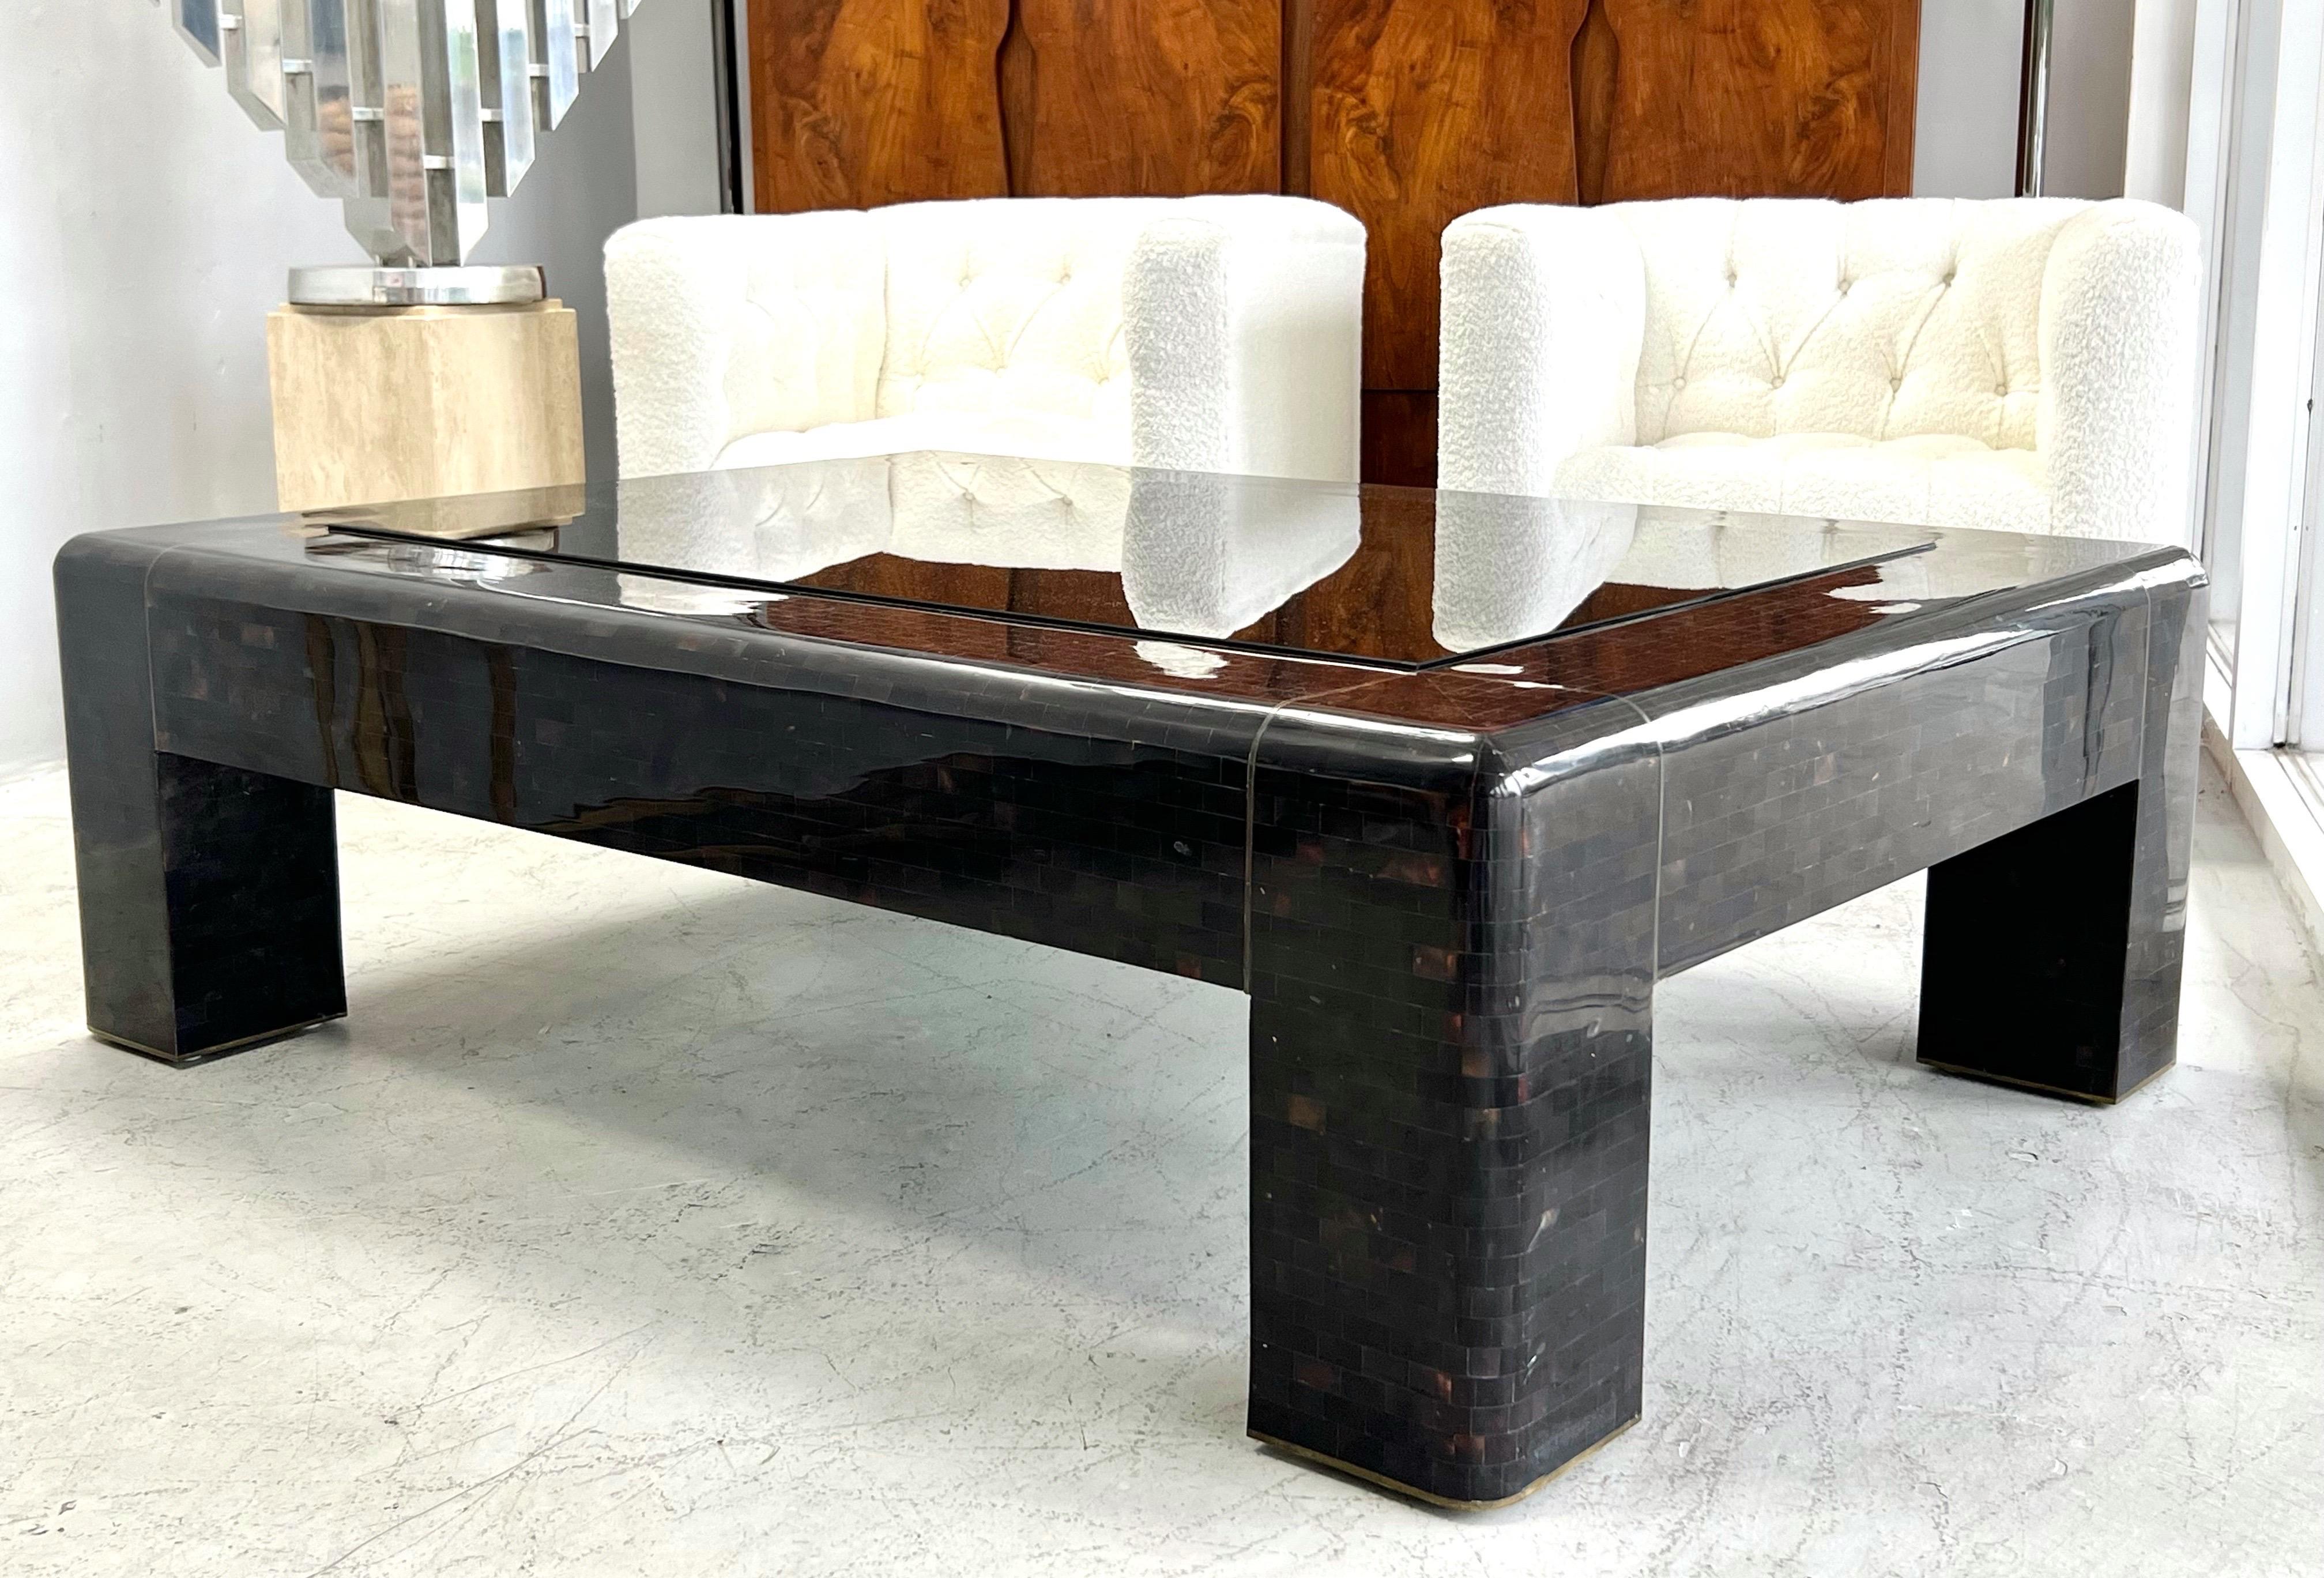 Karl Springer coffee table. This table is stunning with great lines and proportions. The size is quite versatile as it is not too big or too small. No sharp corners.